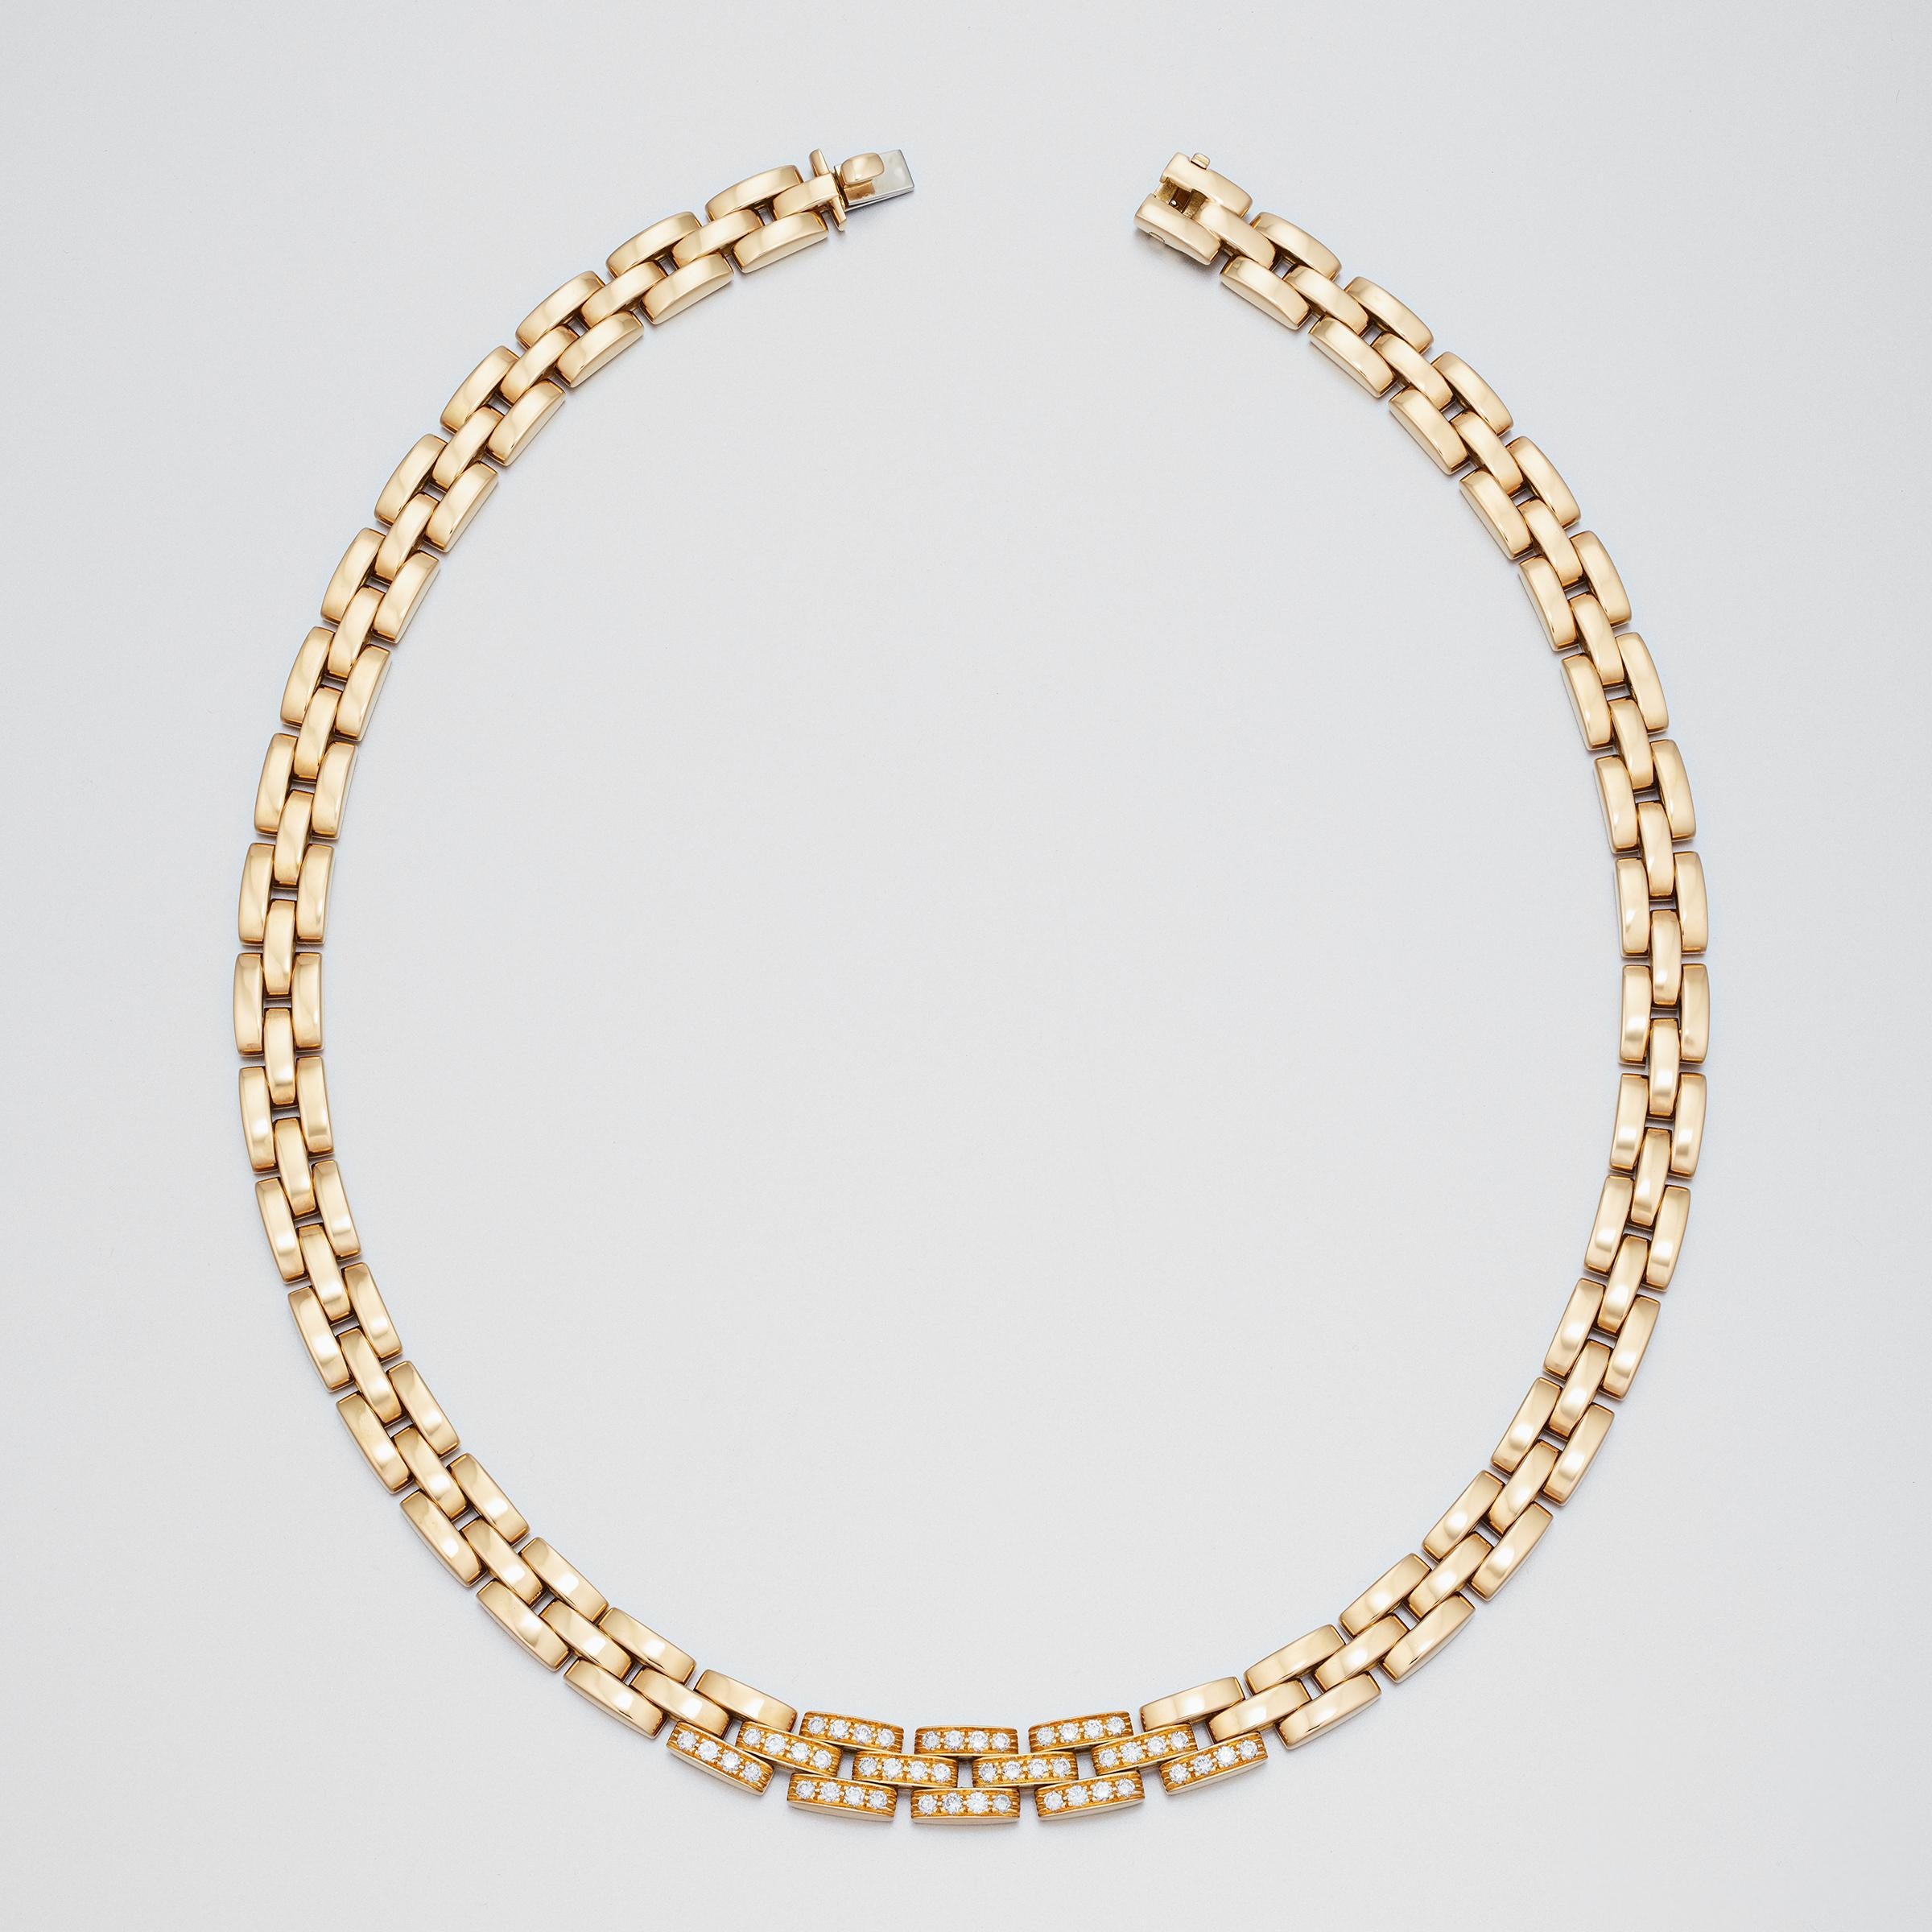 Iconic Cartier Maillon Panthere diamond necklace in 18 karat yellow gold. The necklace is meticulously crafted and consists of high-polish Maillon gold links with central section pave-set with approximately 1.4 carats of glittering fine white (F to